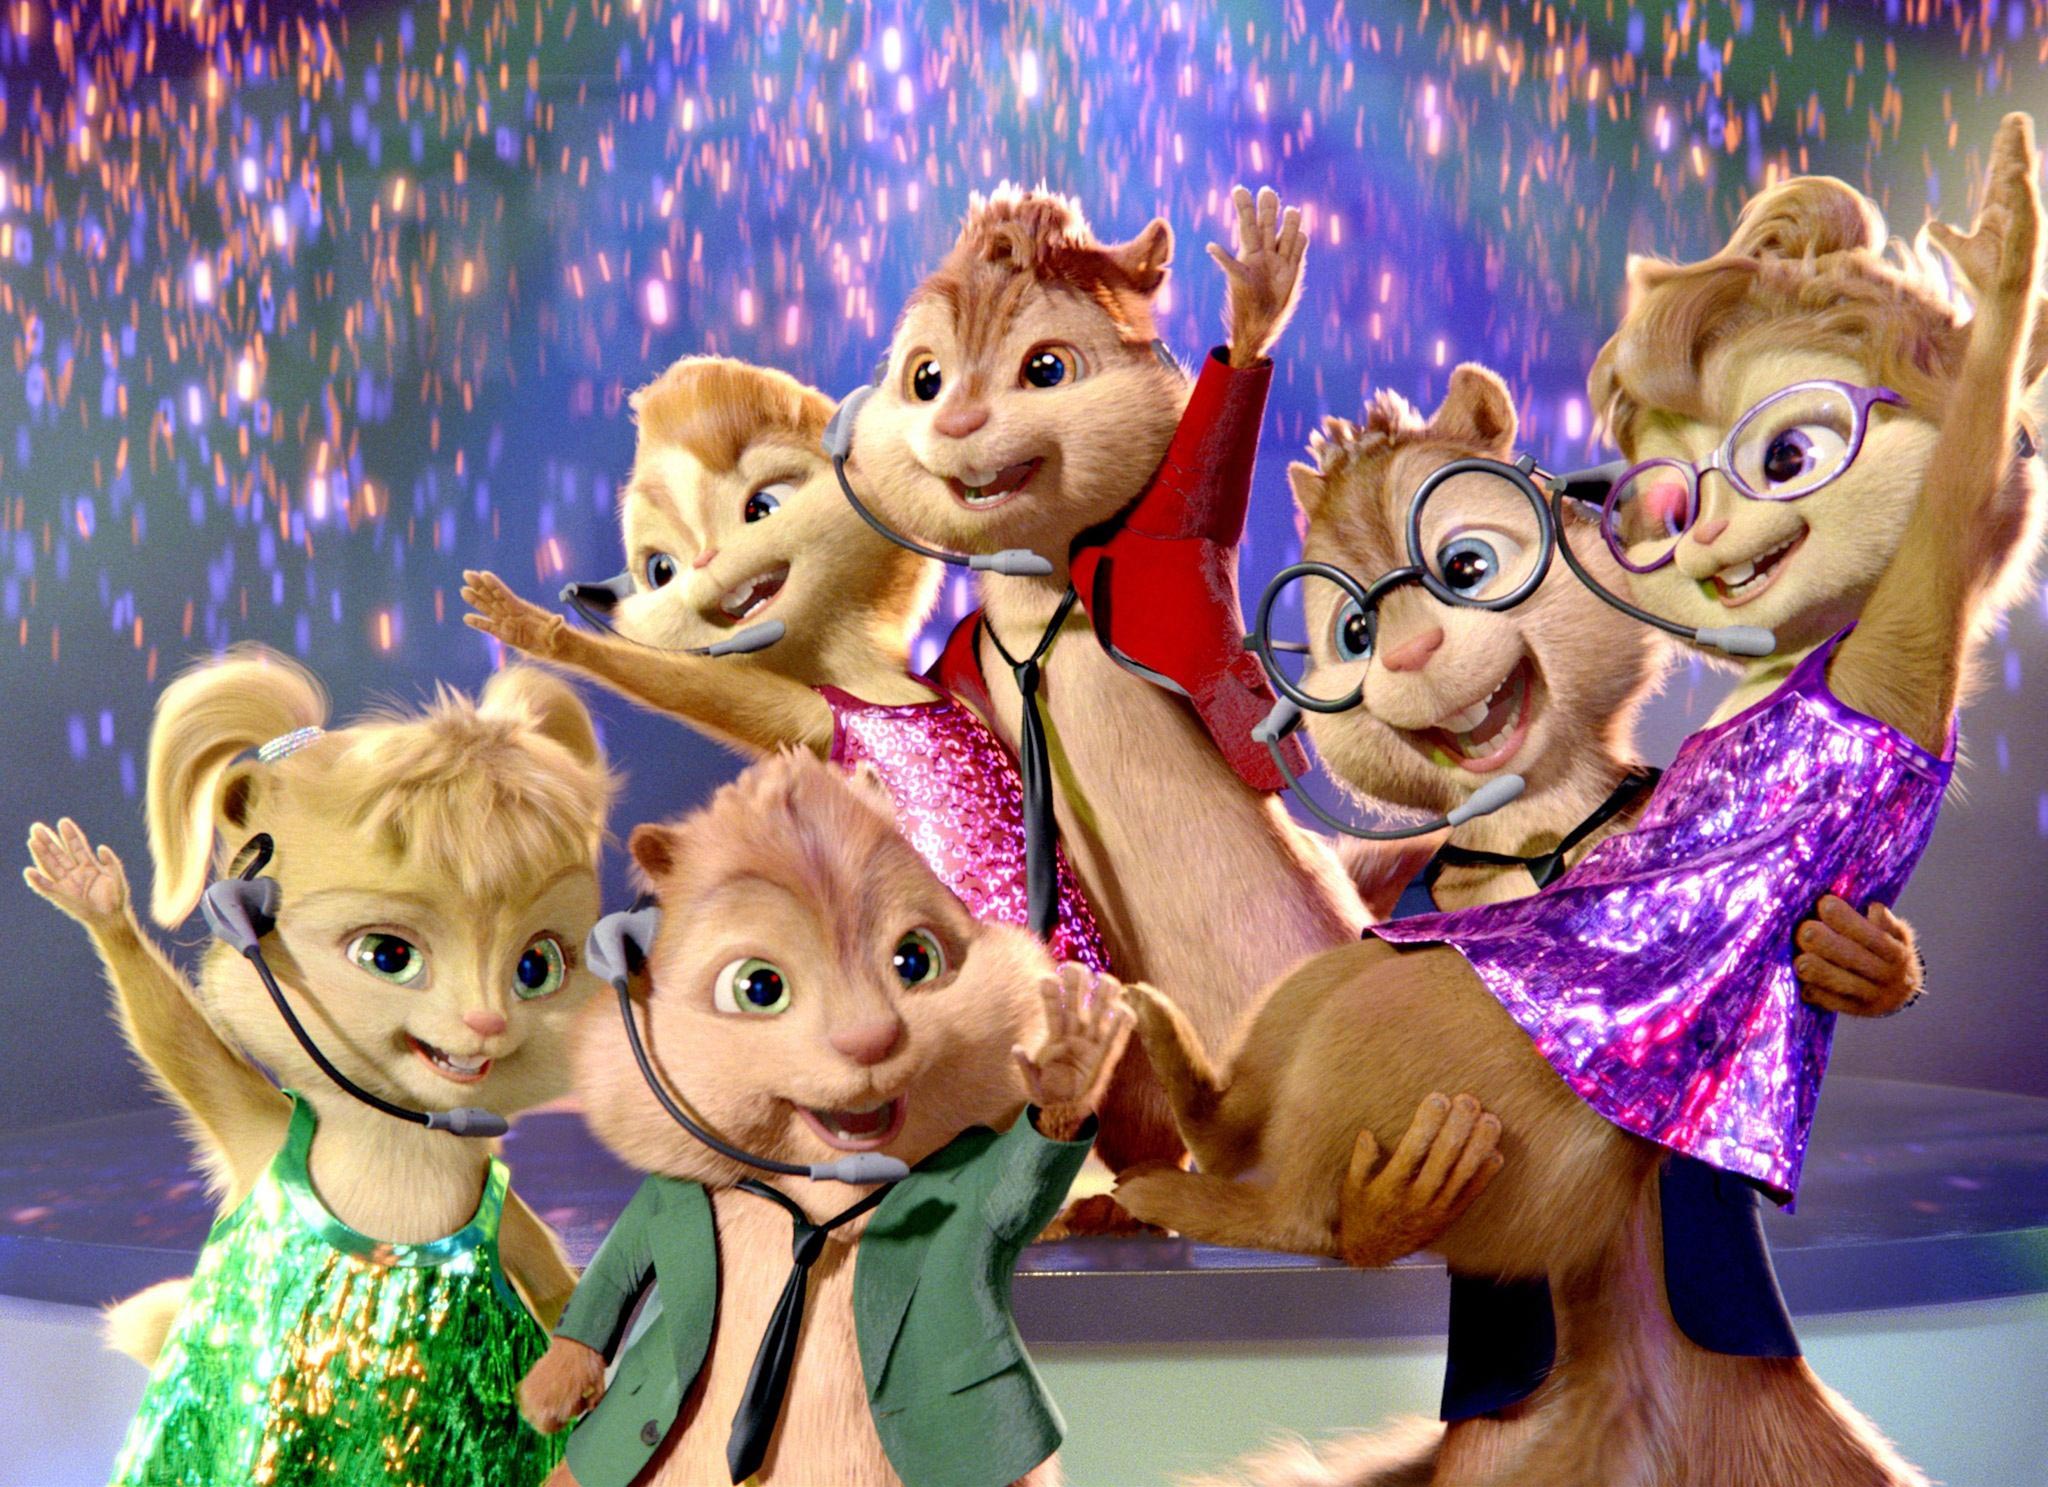 Alvin And The Chipmunks: Chipwrecked HD wallpapers, Desktop wallpaper - most viewed